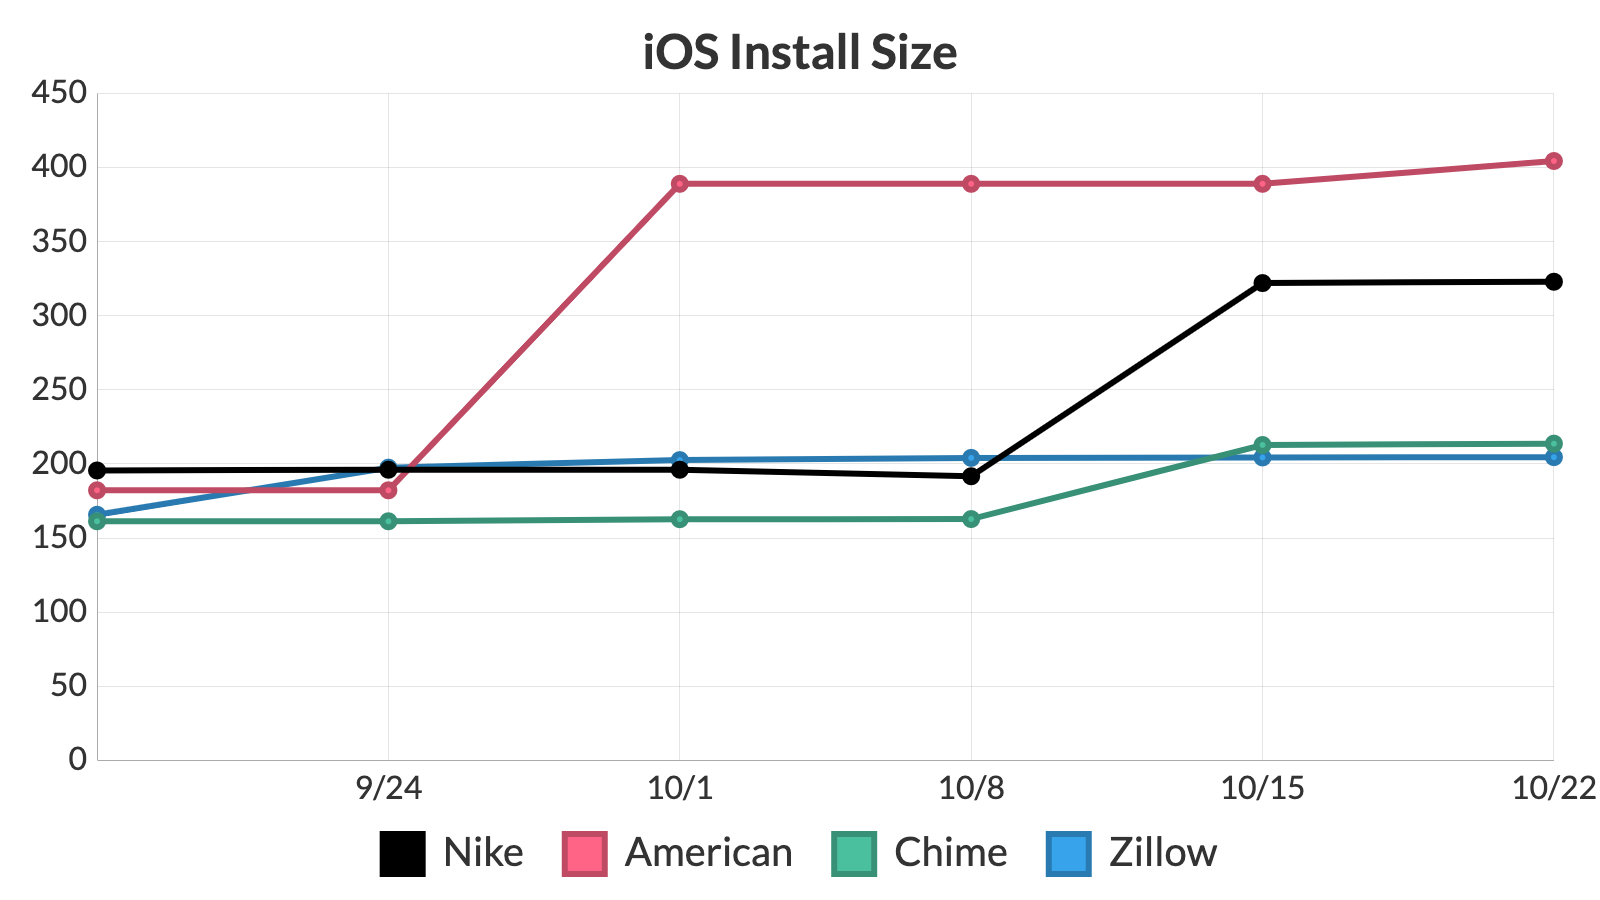 Chart with significant install size increase for Nike, American, Chime, and Zillow iOS Apps